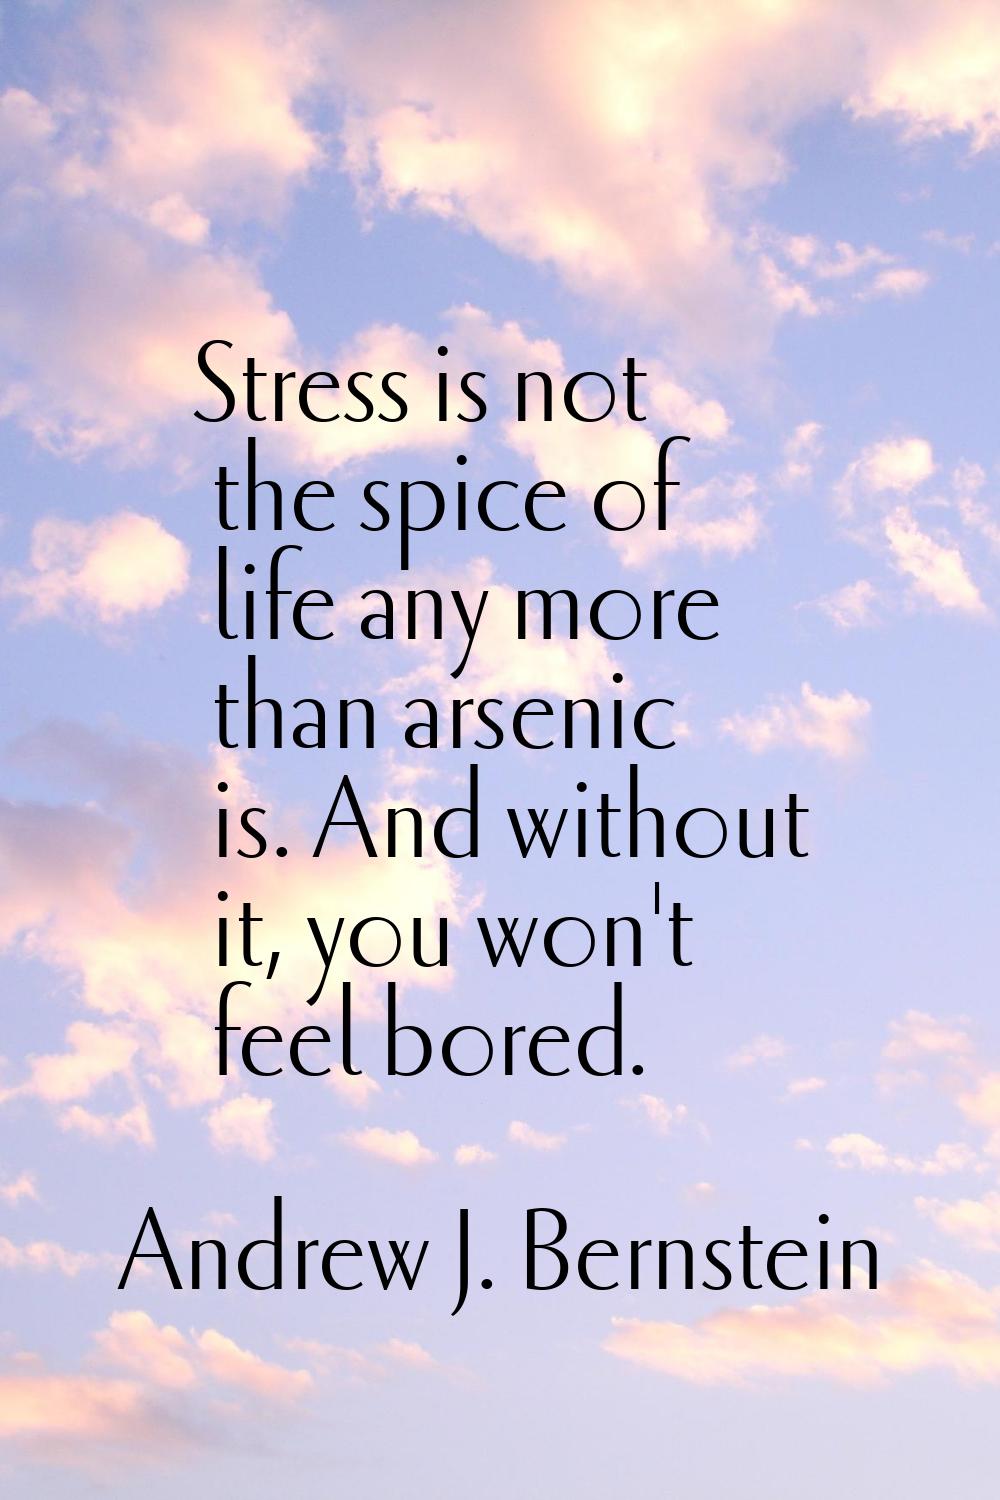 Stress is not the spice of life any more than arsenic is. And without it, you won't feel bored.